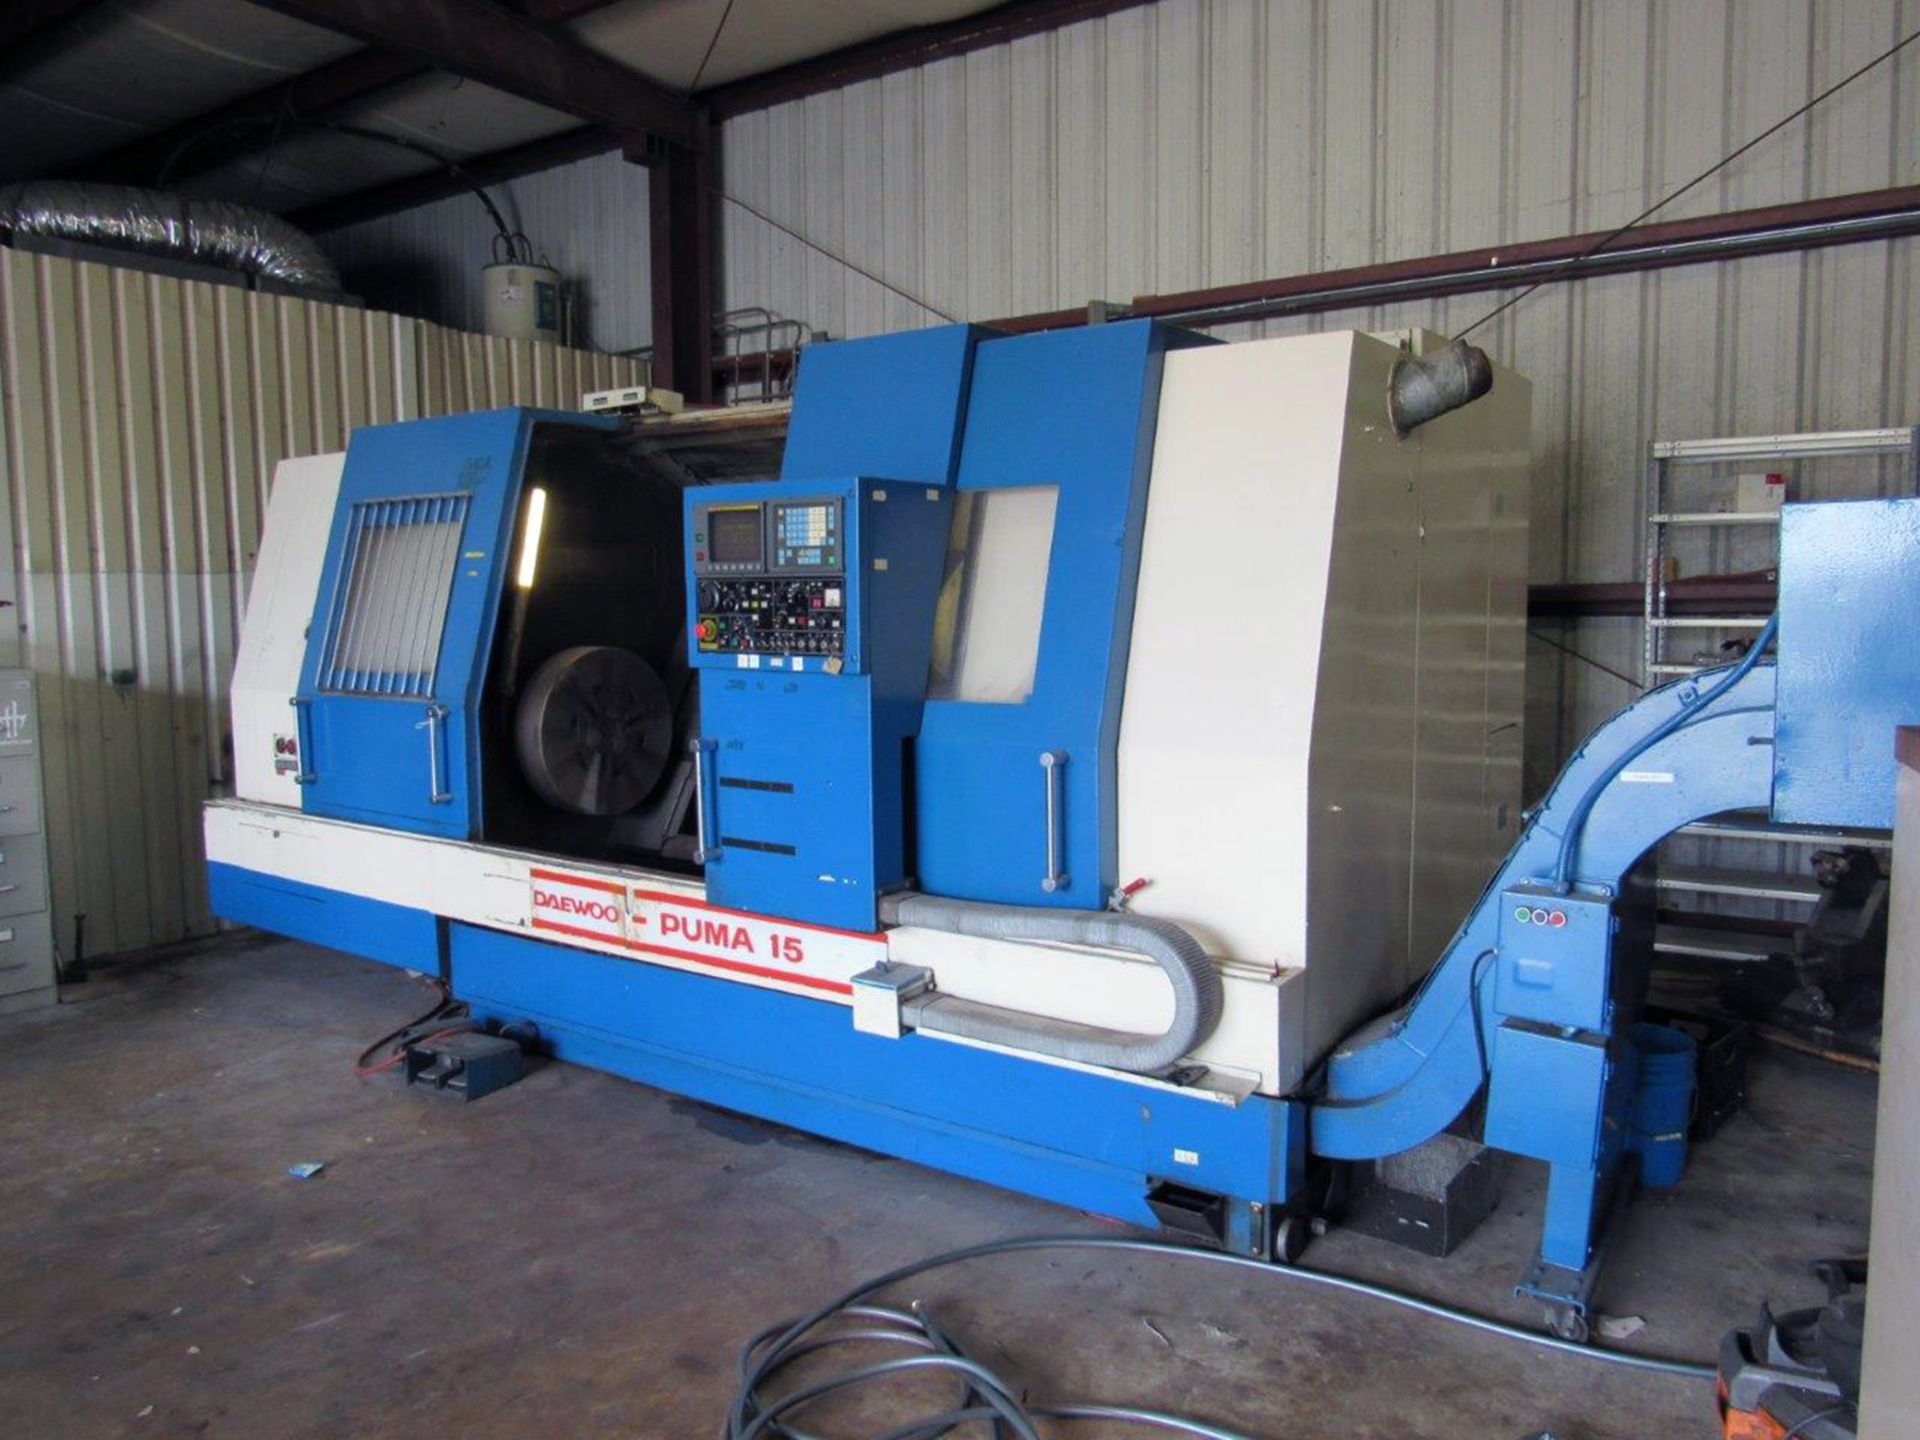 CNC SLANT BED LATHE, DAEWOO PUMA 15, new 1992, 31.1" sw. over bed, 21" over carriae, 26" max. - Image 2 of 8